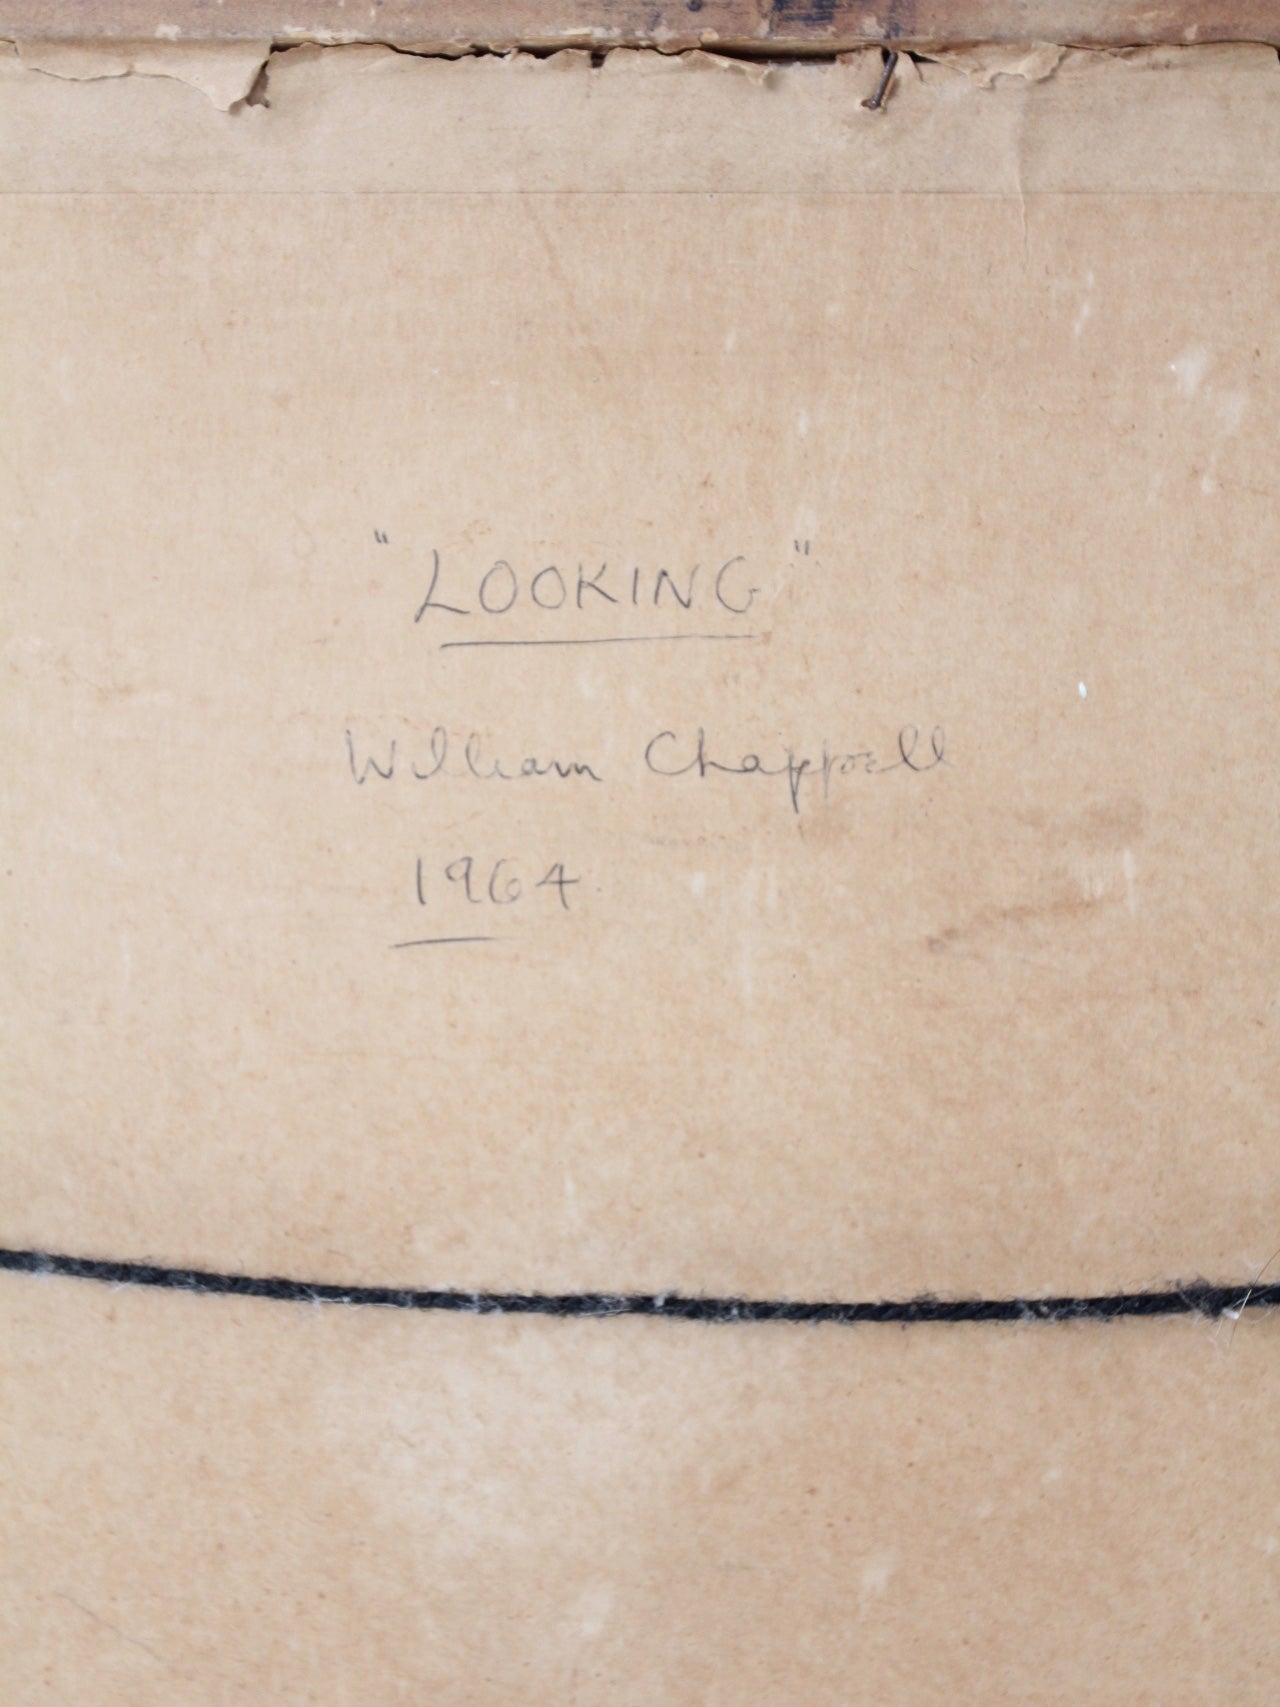 "Looking" by William Chappell, 1964